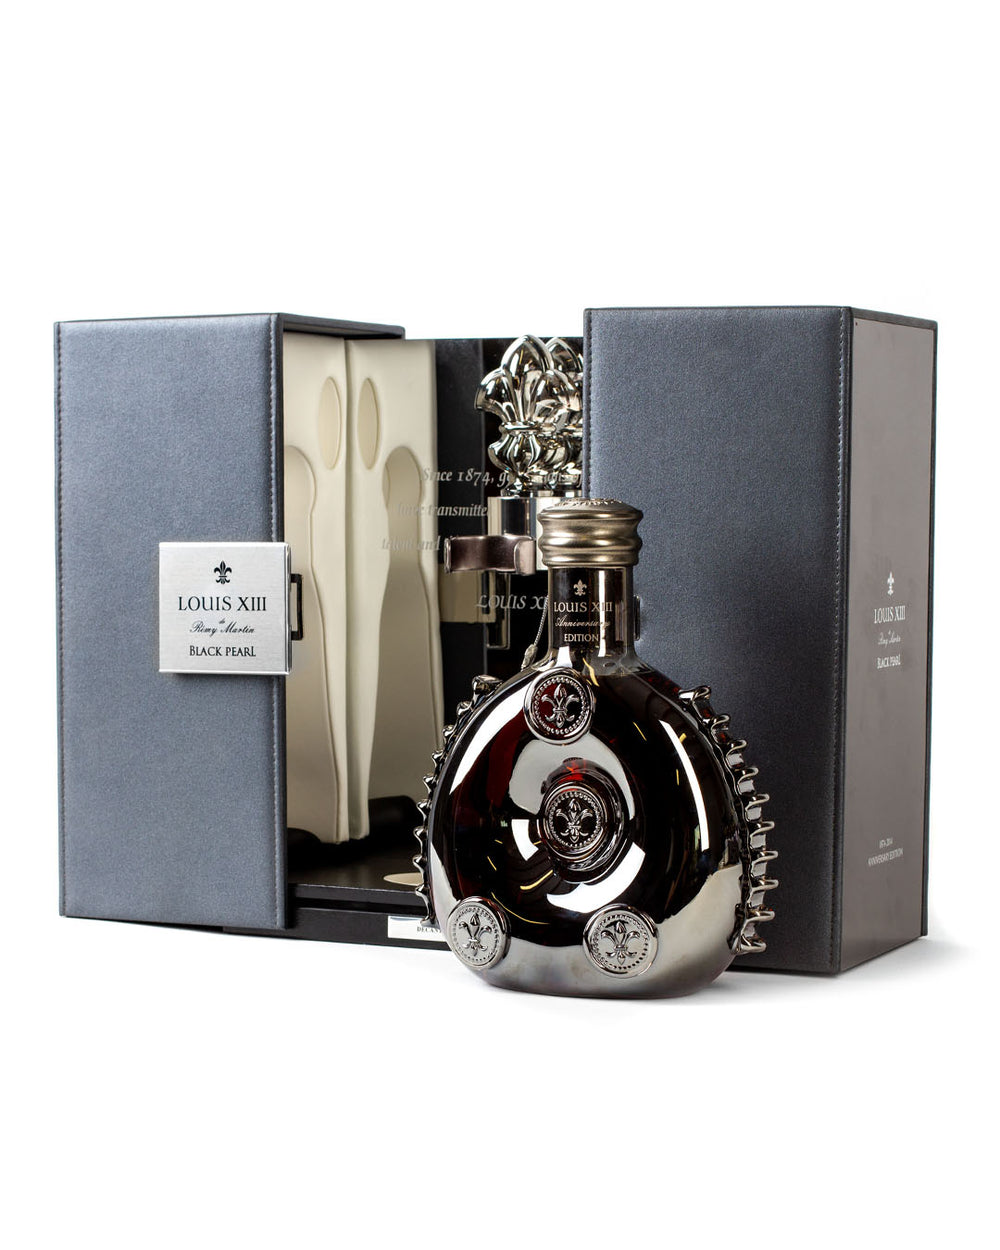 Remy Martin Louis XIII Champagne Cognac 100 year old